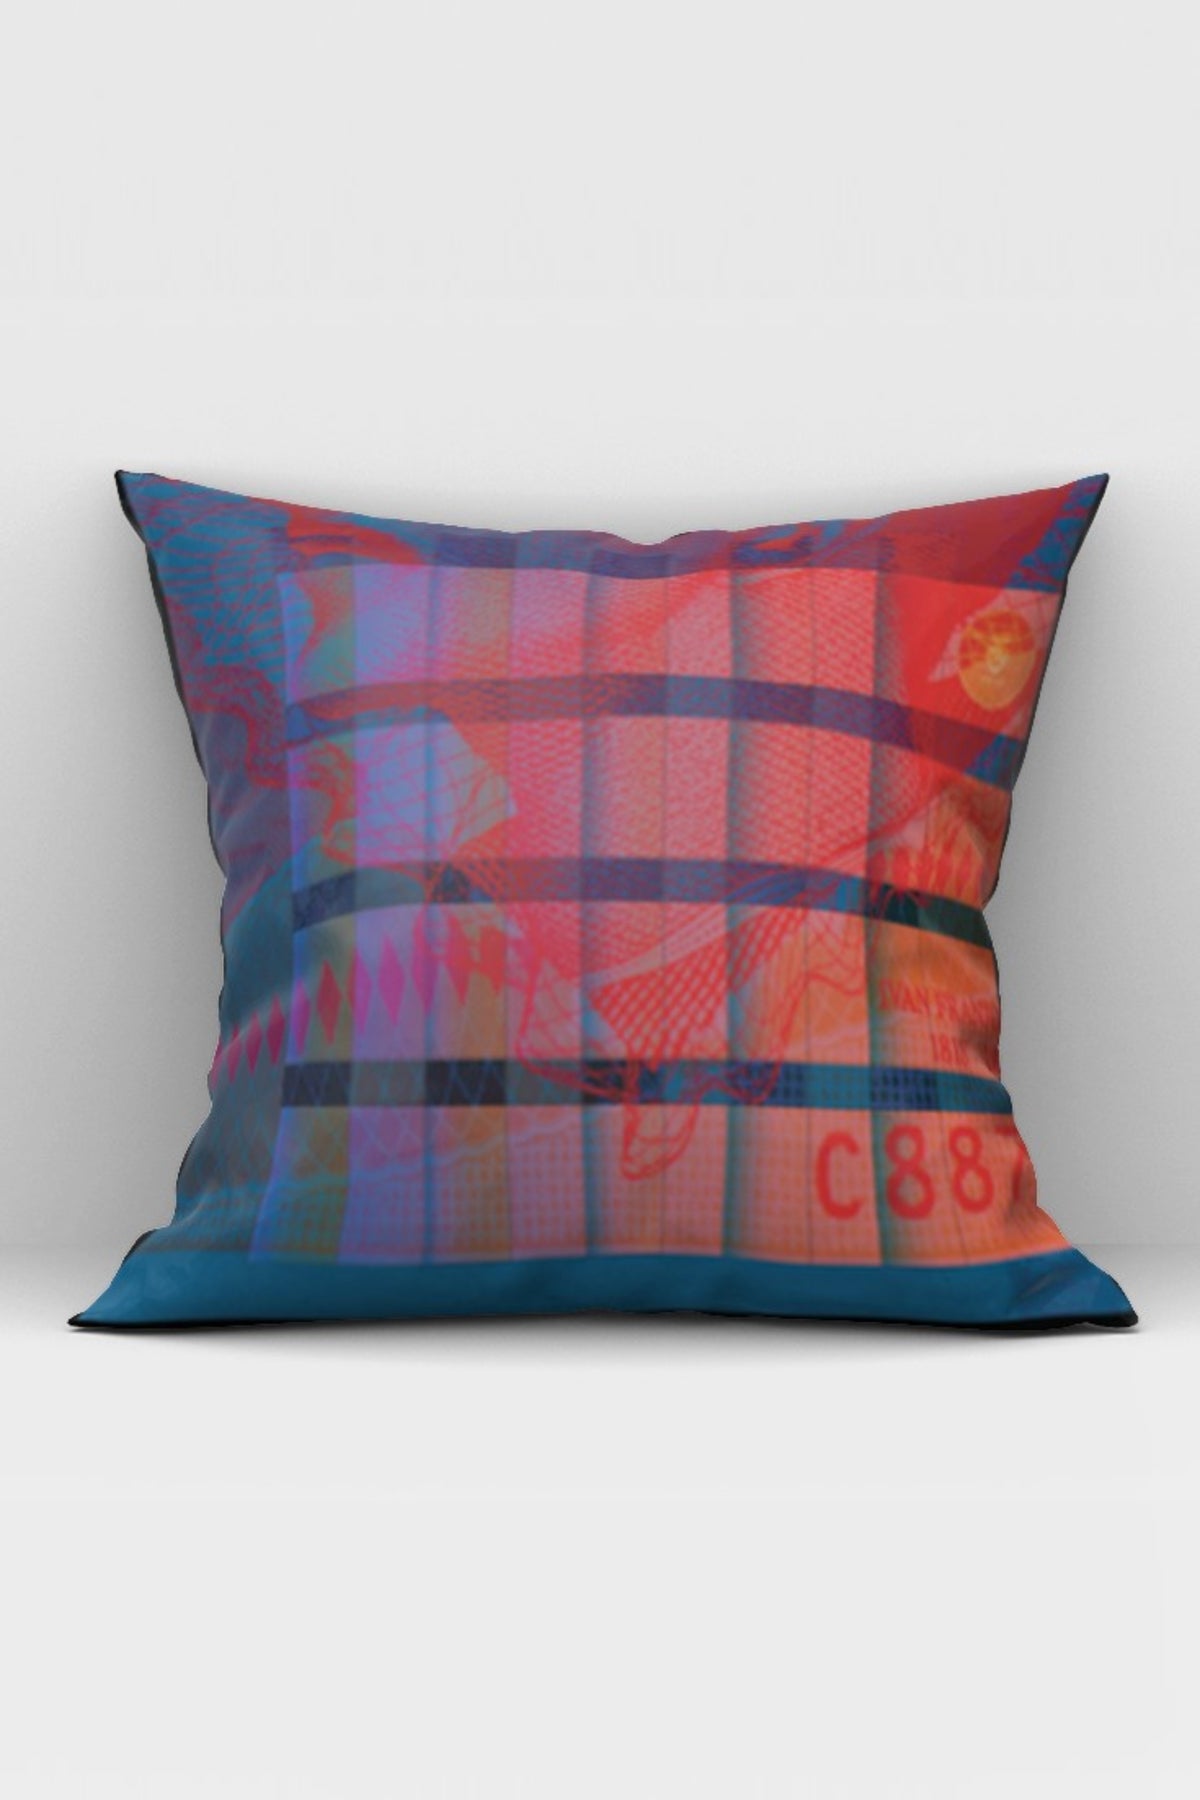 Bless My Funk Pillow - Red &amp; blue.